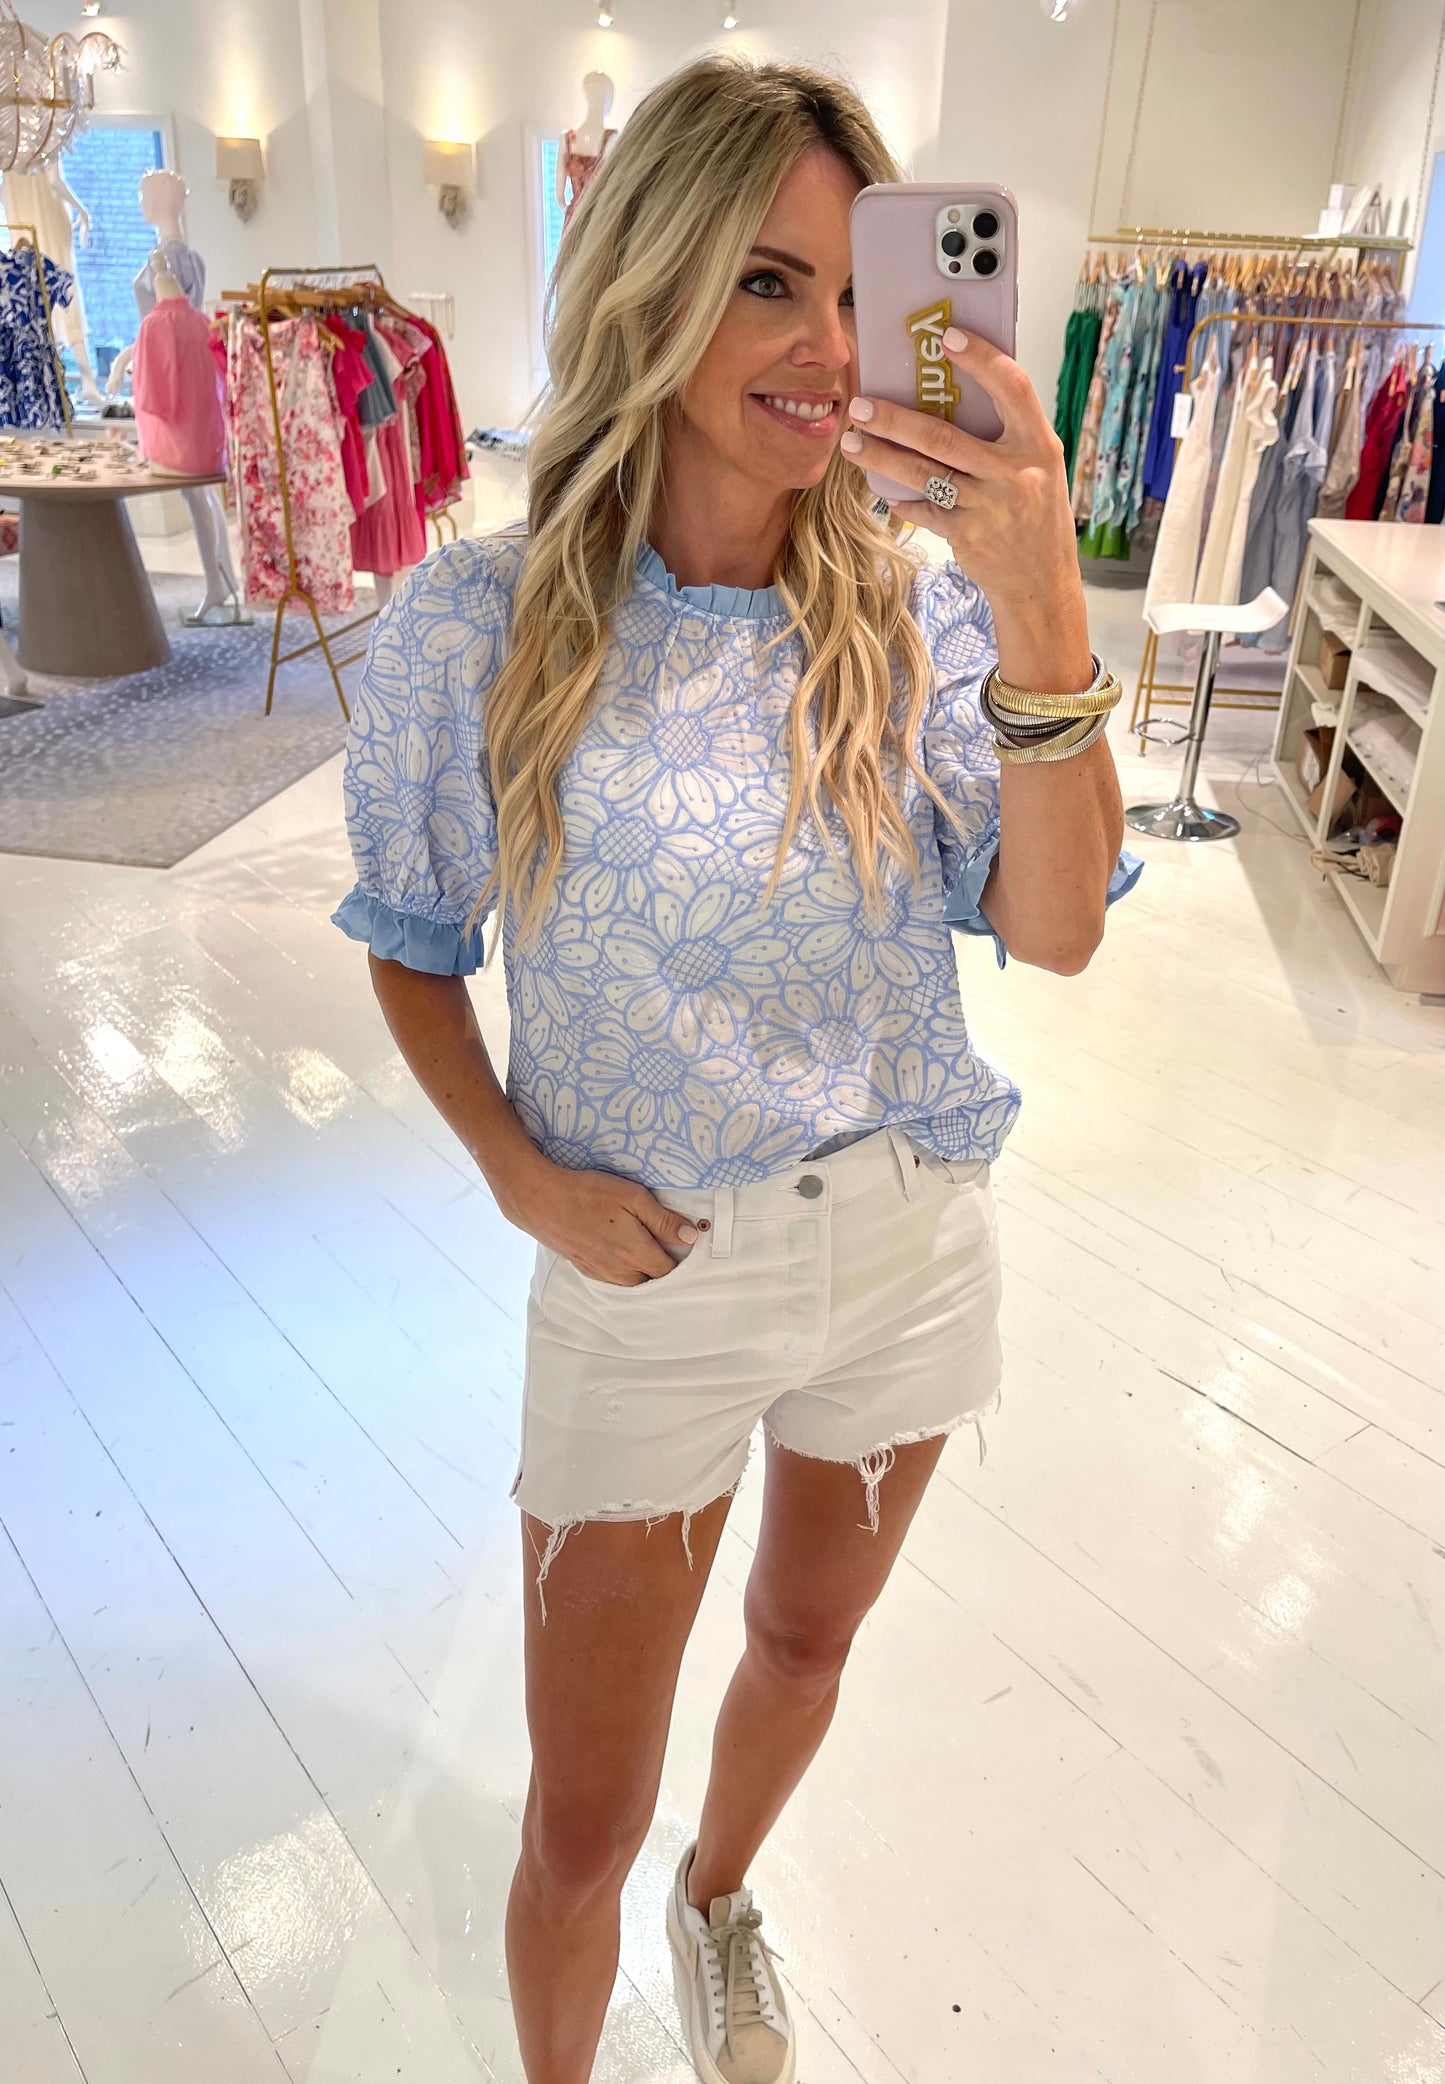 The Missy Ruffle Floral Top